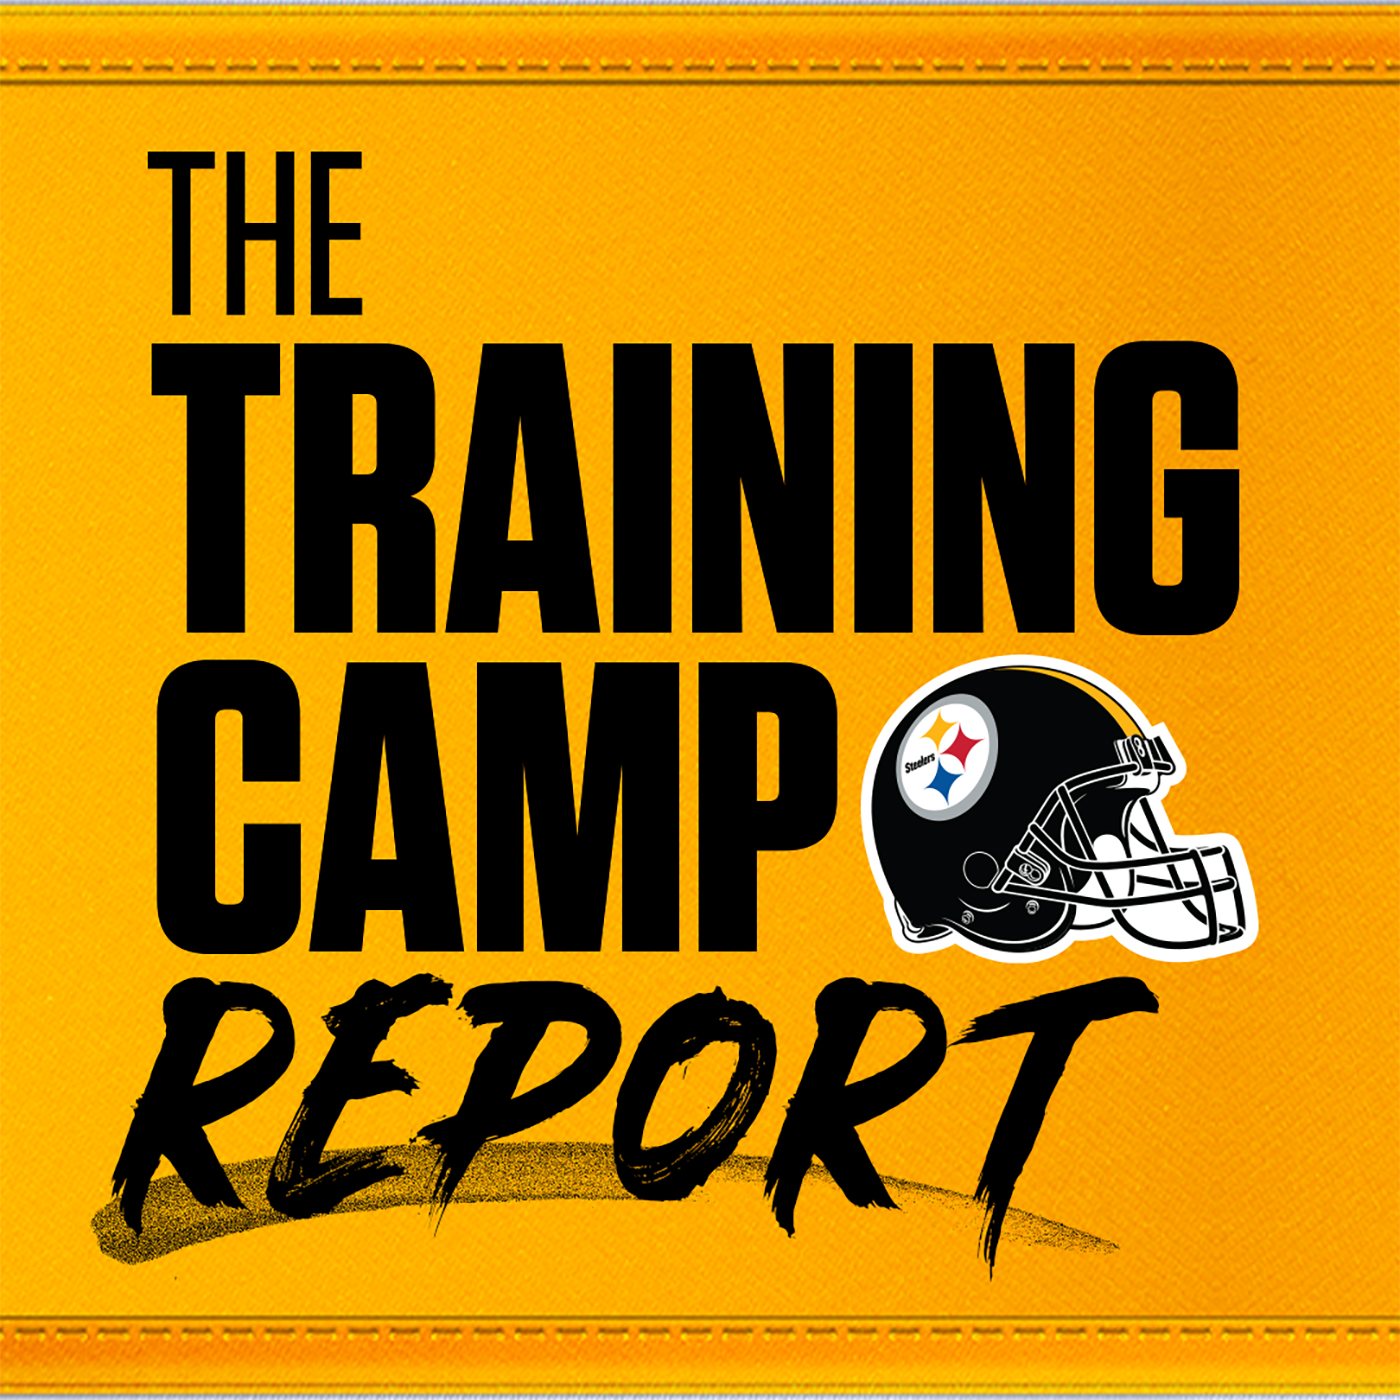 Segment 1: Rainy day at camp, looking at both sides of the ball, camp standouts